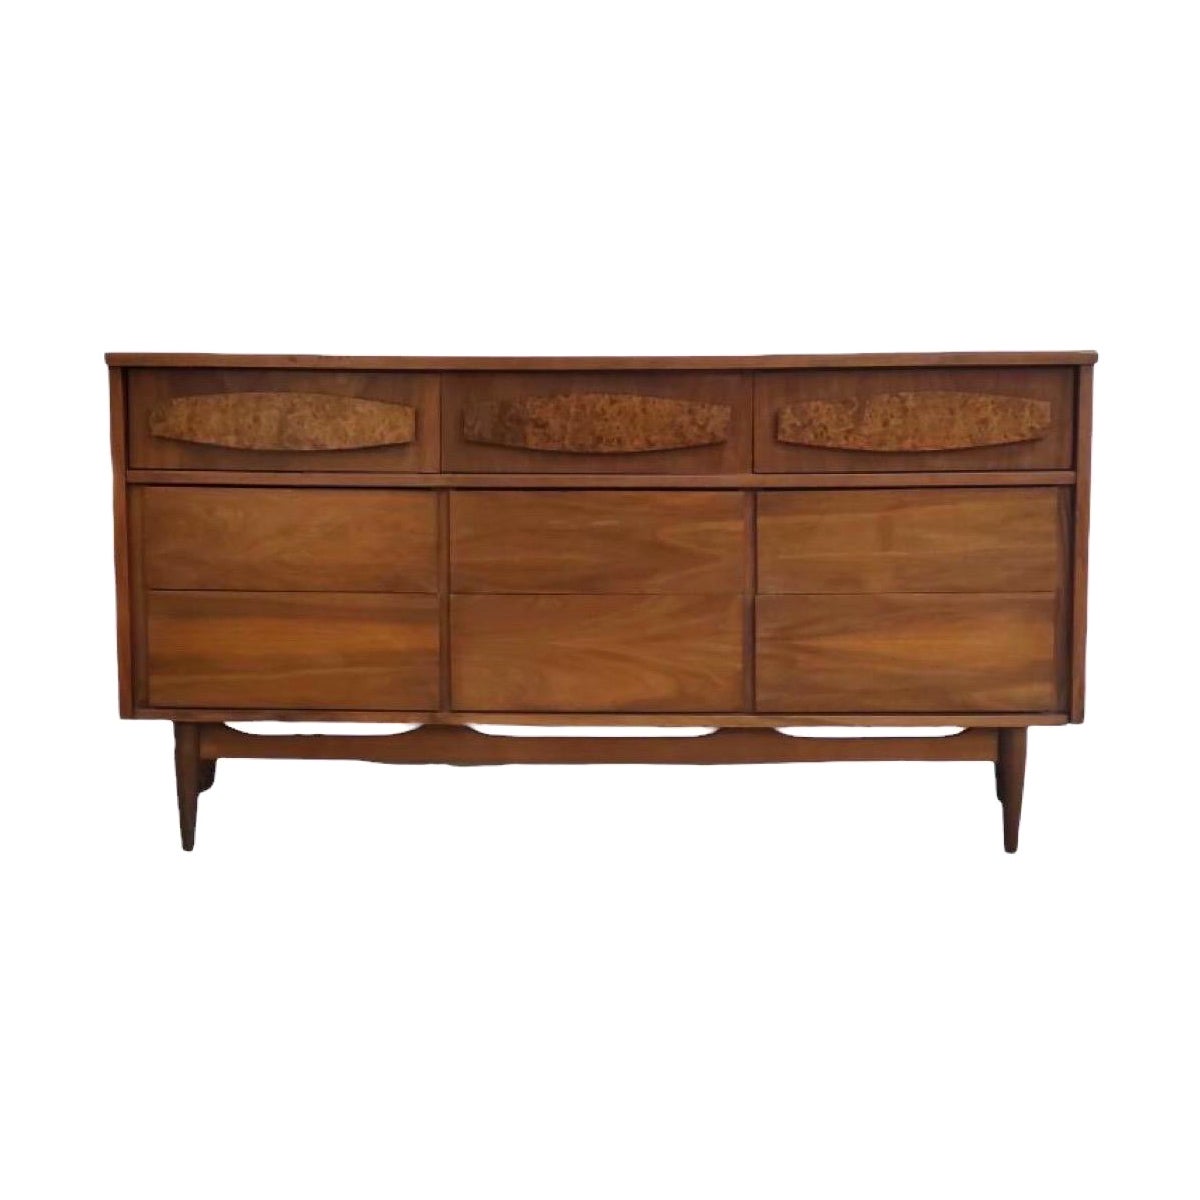 Vintage Mid Century Modern Dresser with Burl-wood Accents For Sale